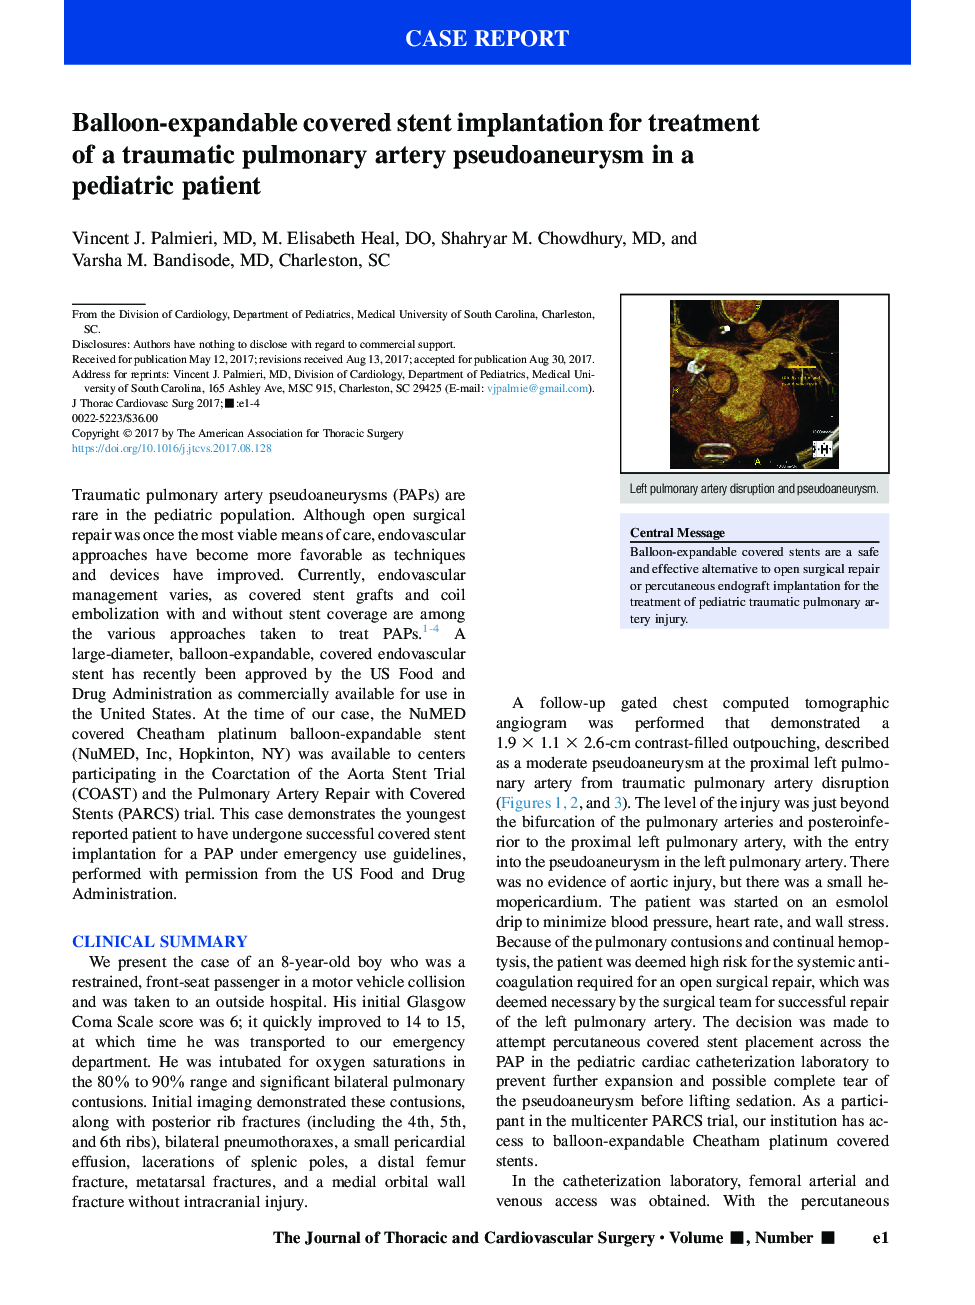 Balloon-expandable covered stent implantation for treatment of a traumatic pulmonary artery pseudoaneurysm in a pediatric patient